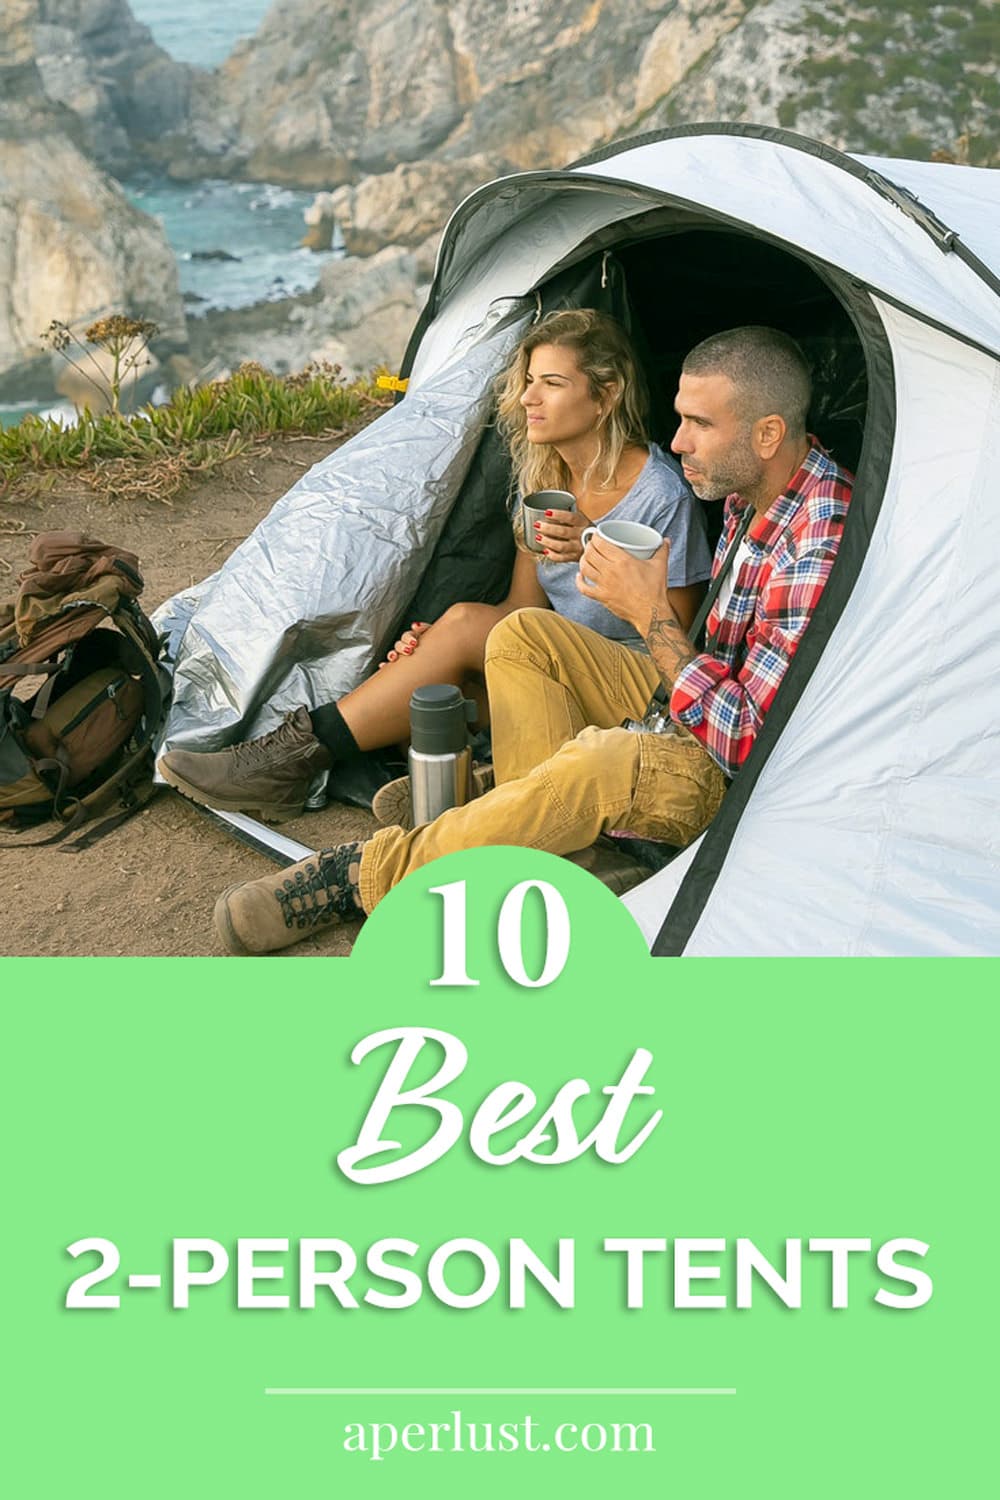 10 Best 2-Person Tents